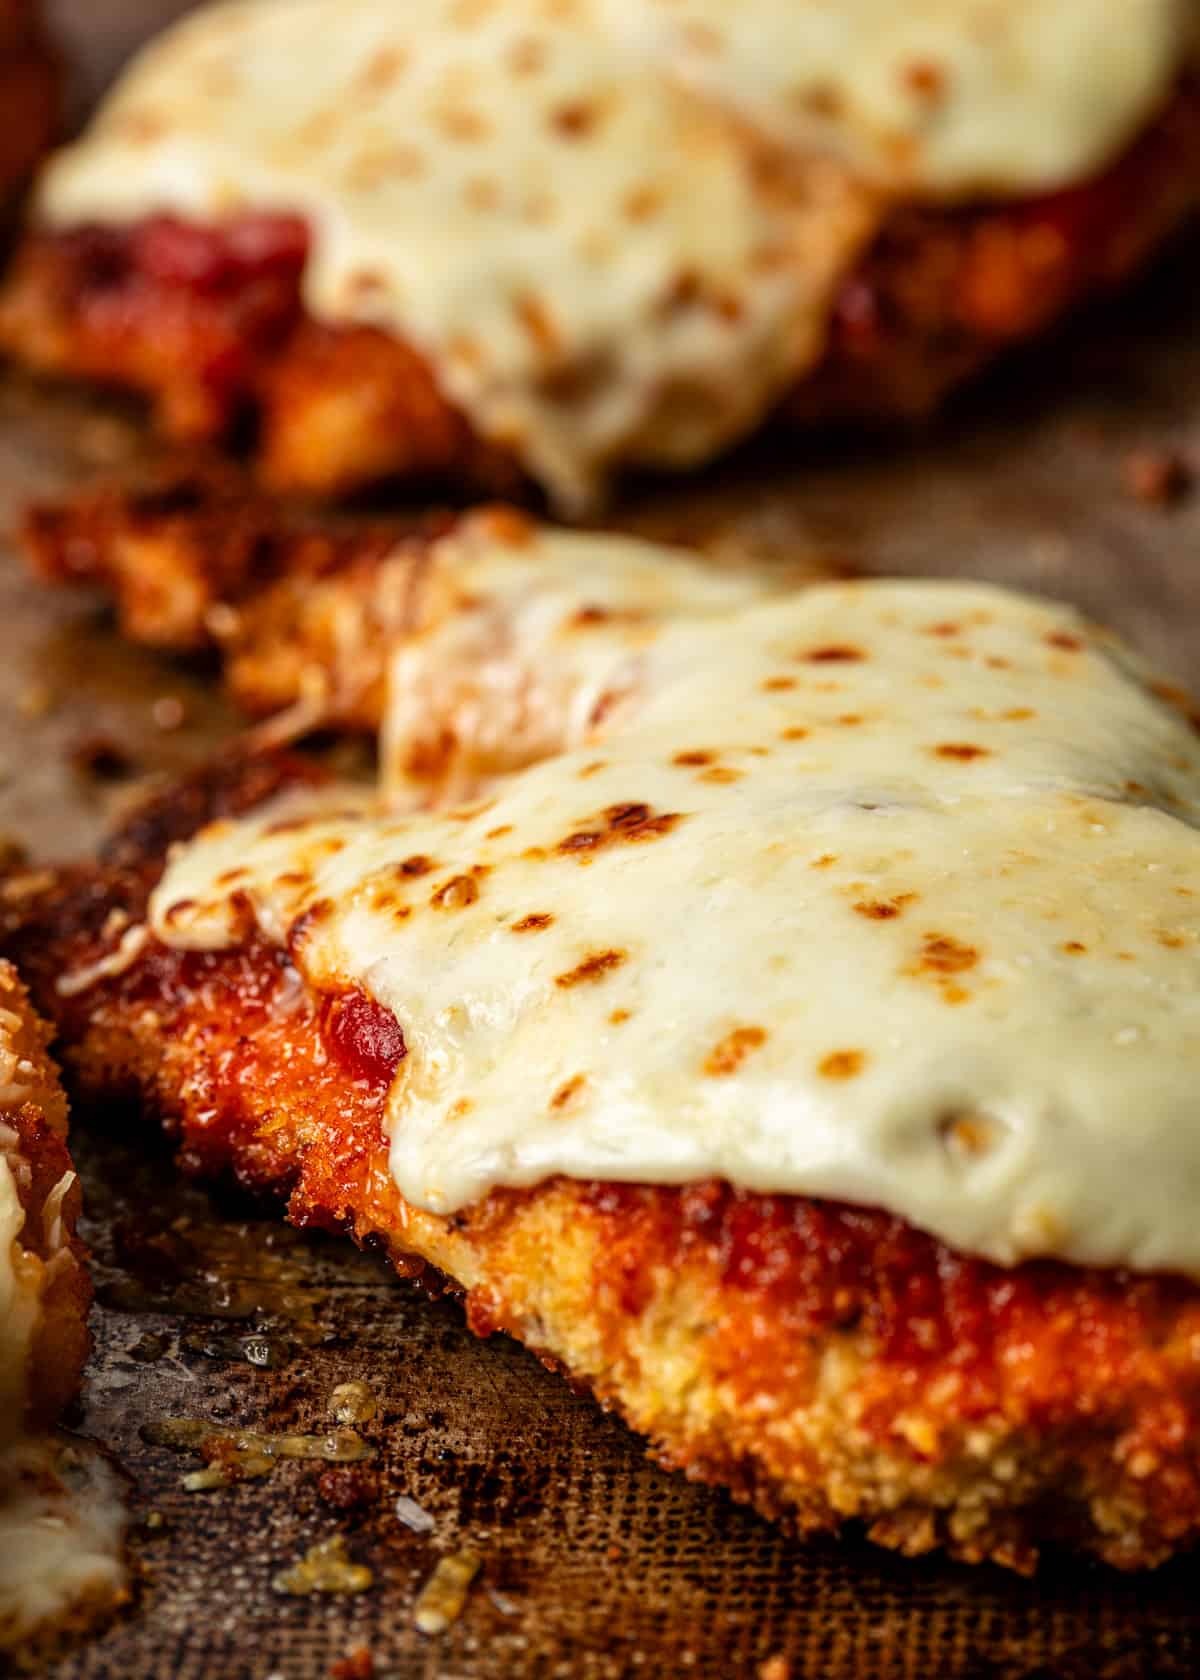 extreme closeup: baked chicken parmigiana on a baking sheet covered in melted cheese